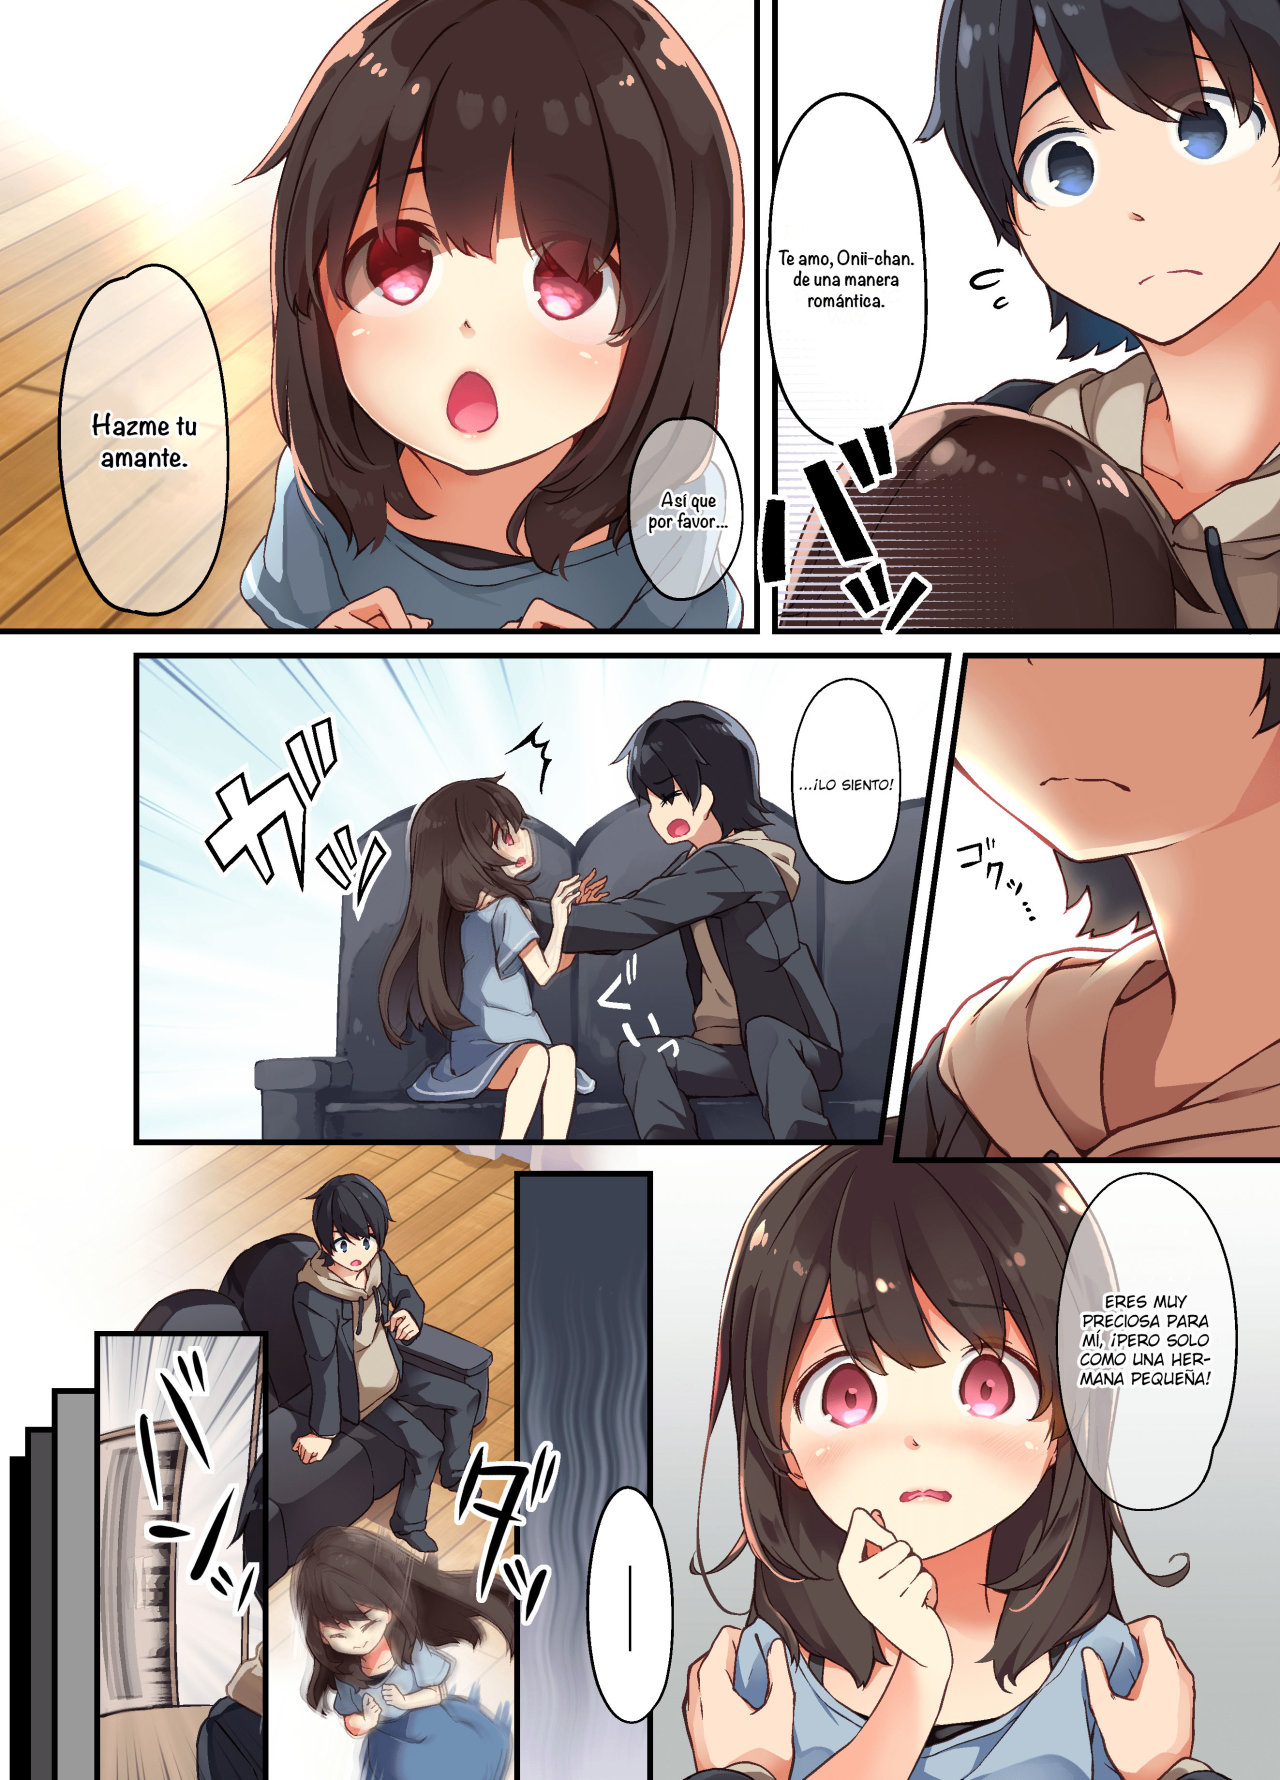 A Yandere Little Sister wants to be impregnated by her big brother - 6